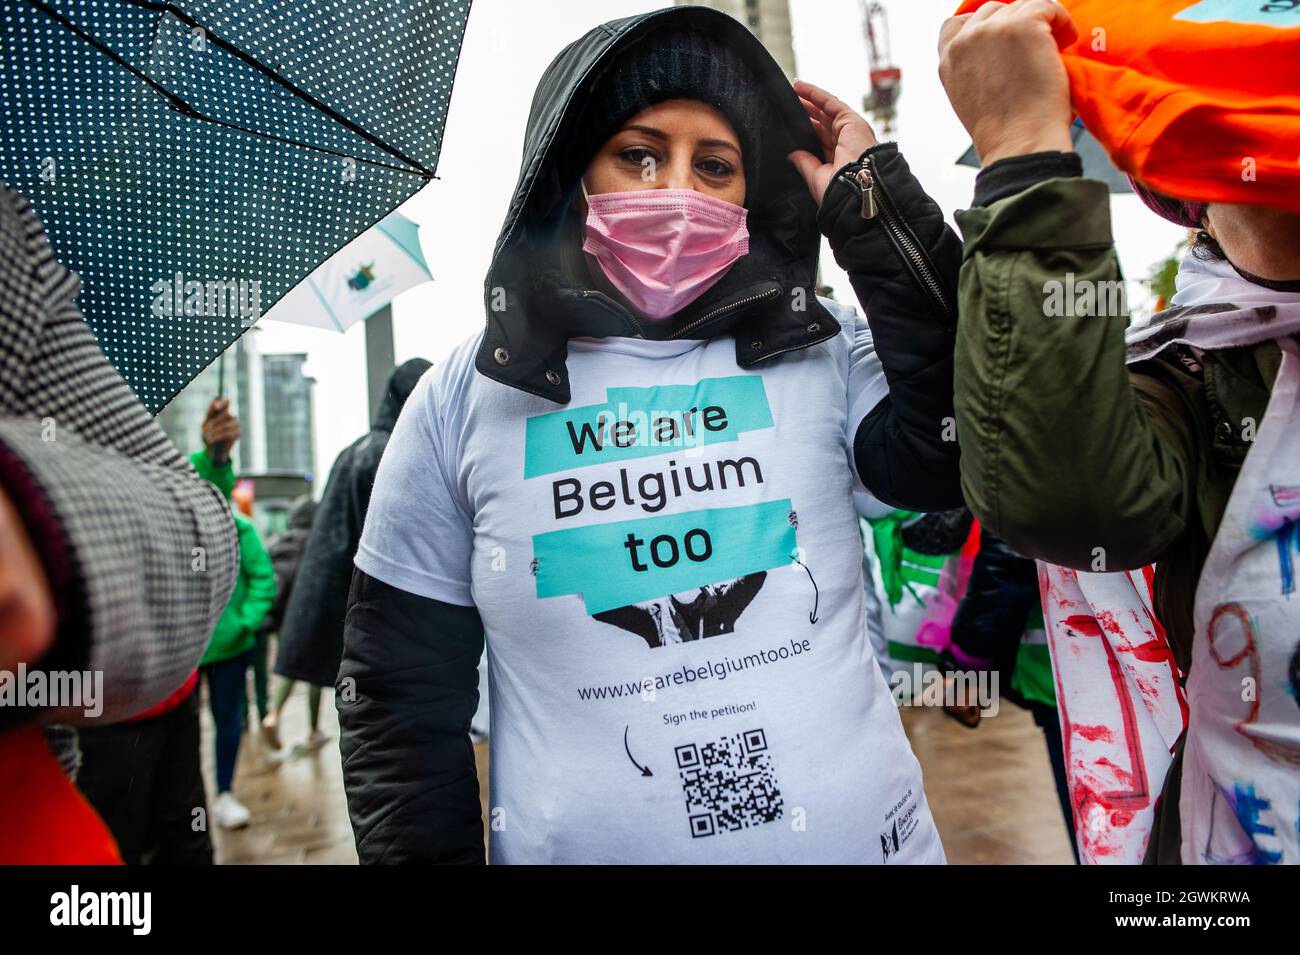 A woman is seen wearing a t shirt for the demonstration in support of the illegal immigrants in Belgium.Sans-papiers (without papers), an organization that represents and advocates for undocumented migrants in Belgium, planned a march in Brussels, as part of a broader campaign called “We are Belgium, too.” Thousands of people demonstrated to demand that a national regulatory commission should be established in regards to undocumented migration, and calls for the integration of undocumented migrants into the Belgian rule of law. Stock Photo